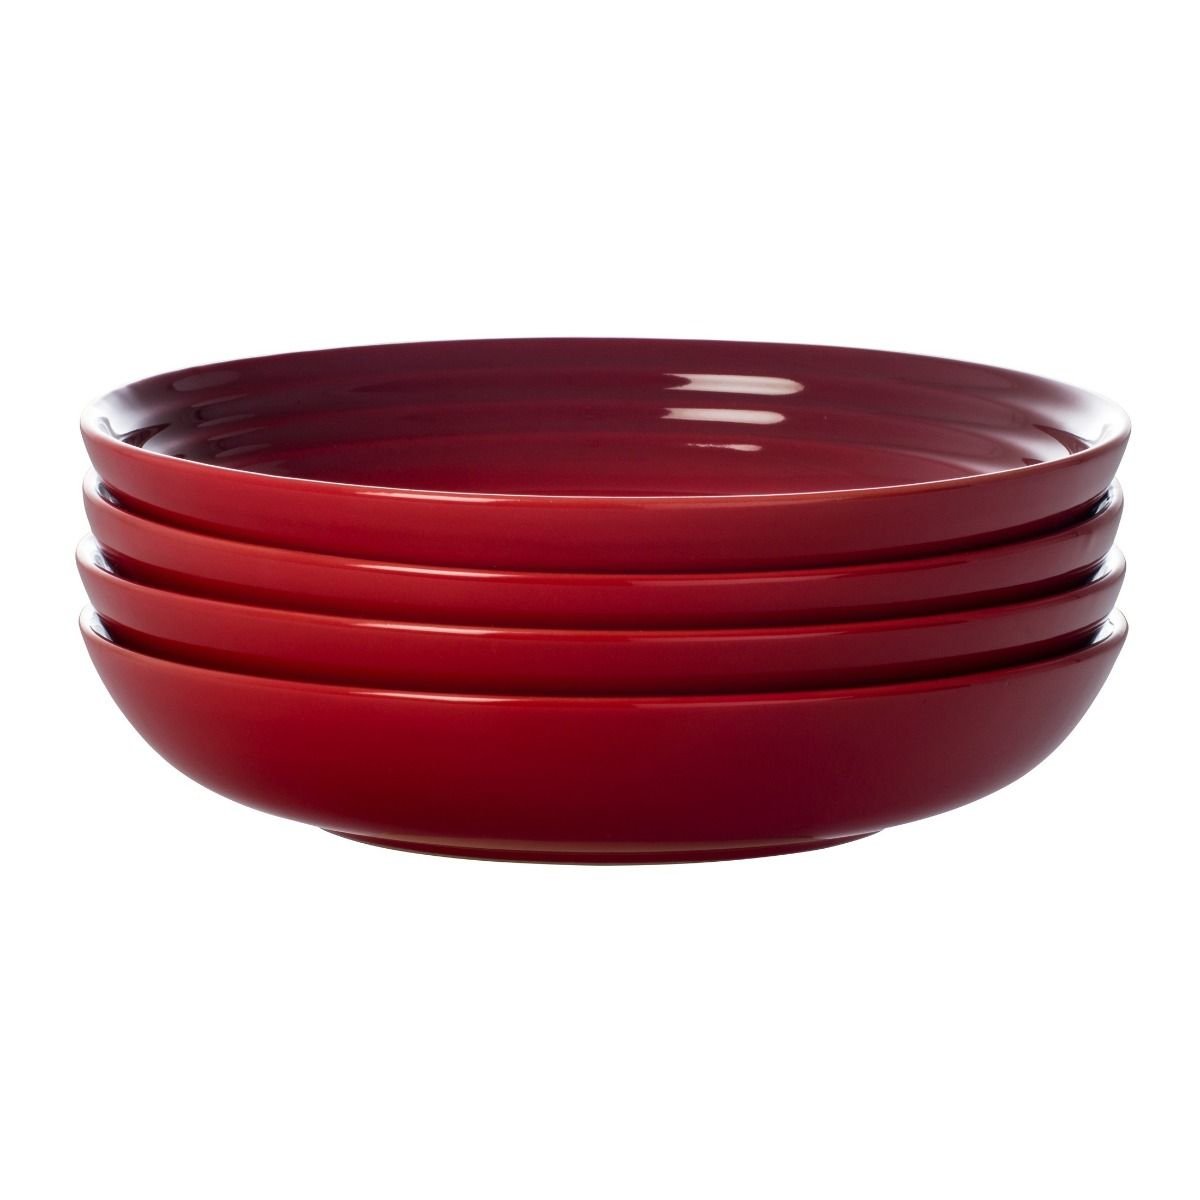 Le Creuset Pet bowl S Stoneware Microwave compatible small dogs